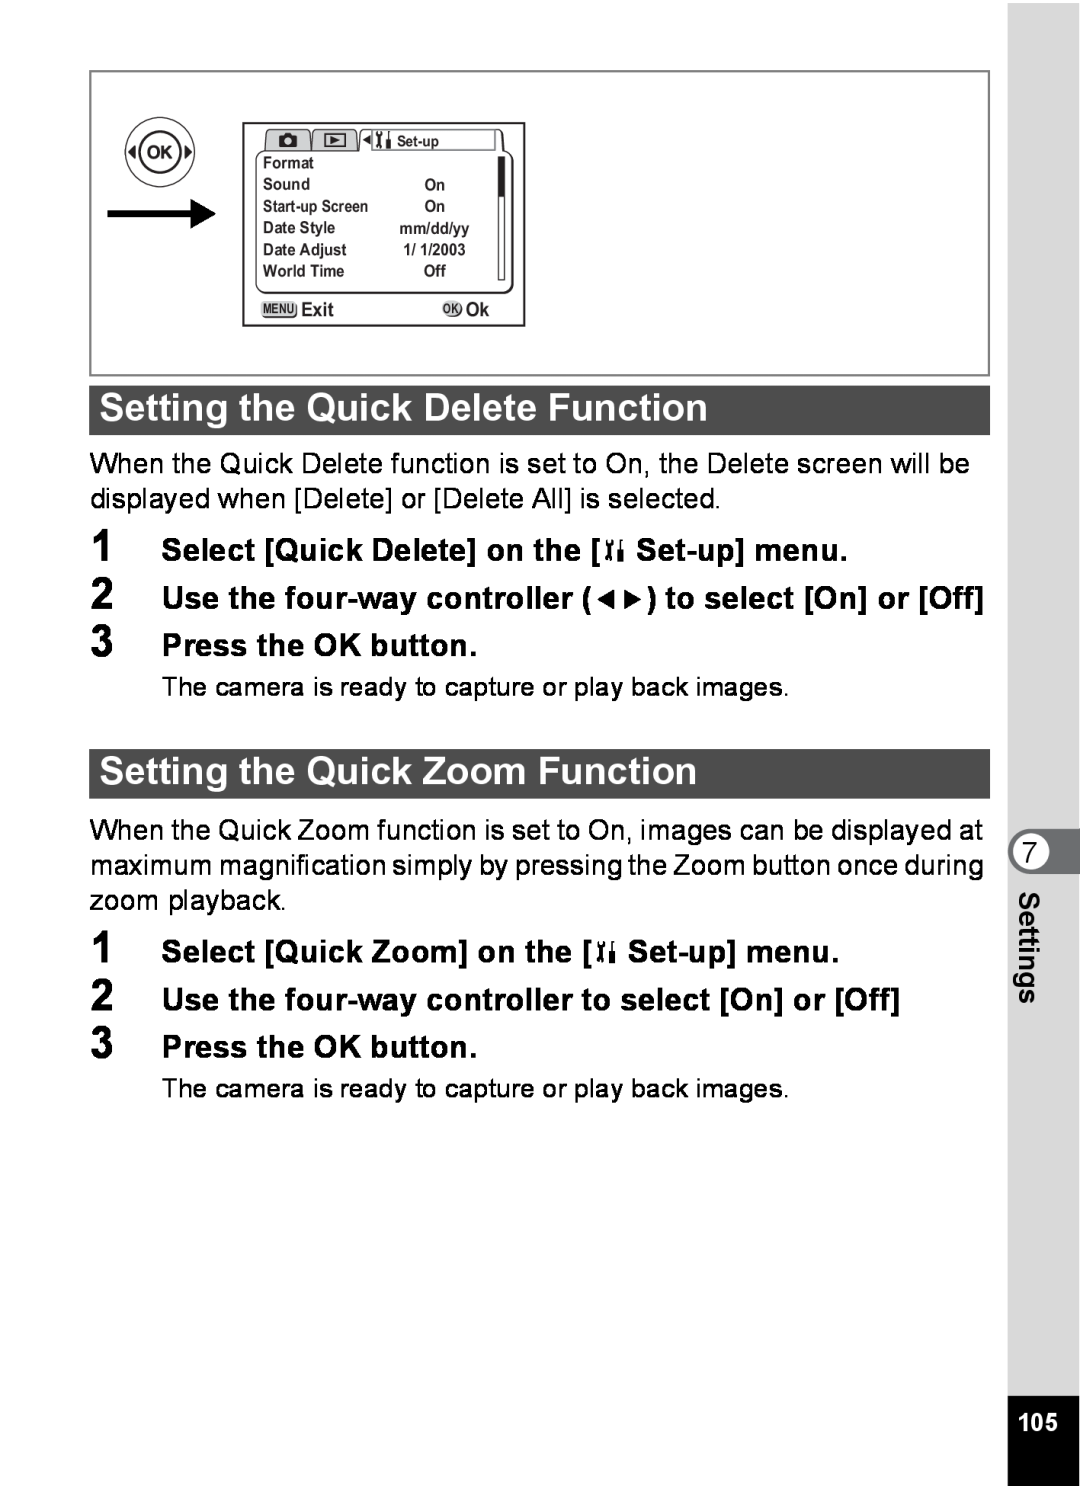 Pentax S4 Setting the Quick Delete Function, Setting the Quick Zoom Function, Select Quick Delete on the B Set-up menu 